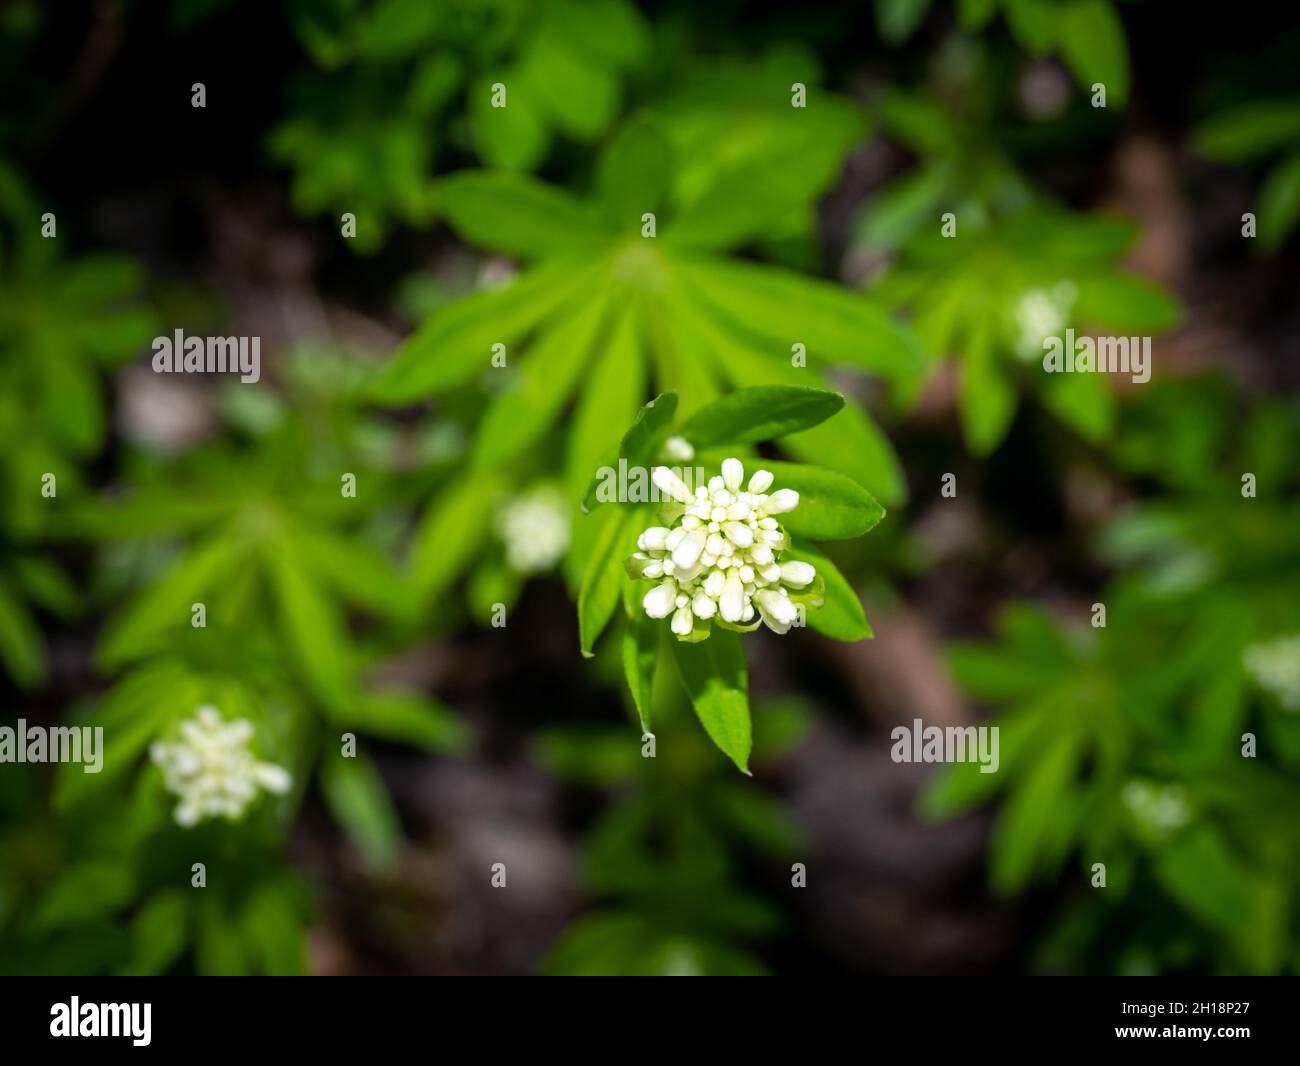 Sweetscented bedstraw or woodruff, Galium odoratum, white flower buds and green foliage in spring, Netherlands Stock Photo